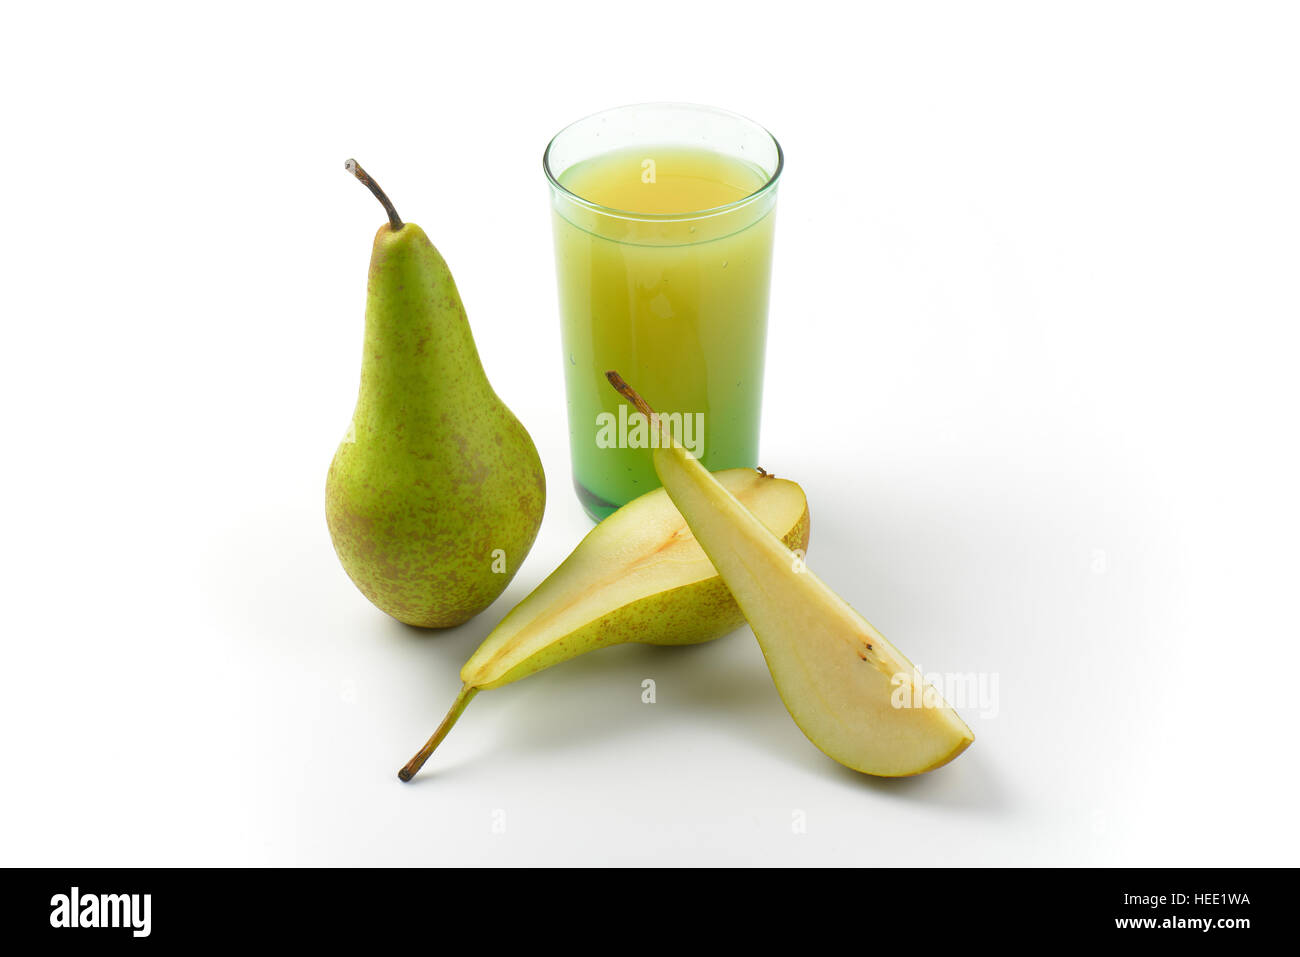 glass of pear juice and fresh pears next to it Stock Photo